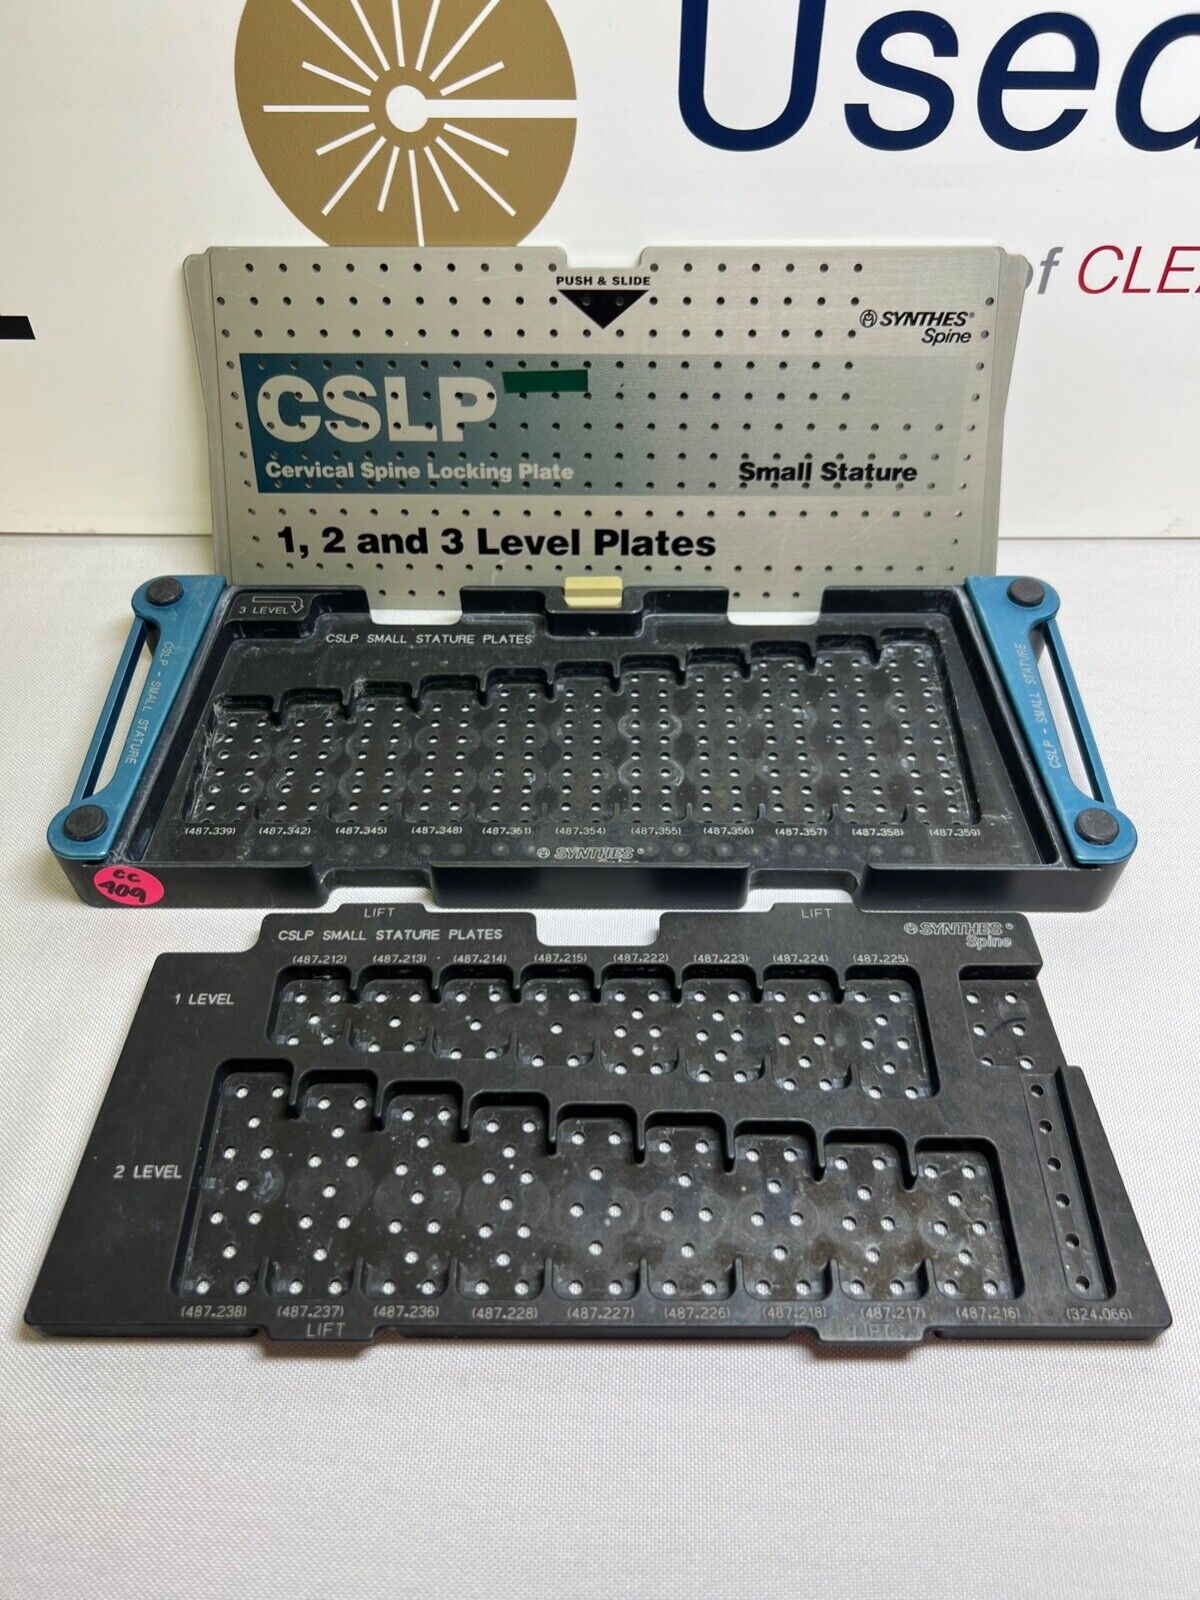 Synthes CSLP Cervical Spine Locking Plate Module 1,2 & 3 Plates Case (EMPTY) CCMED409